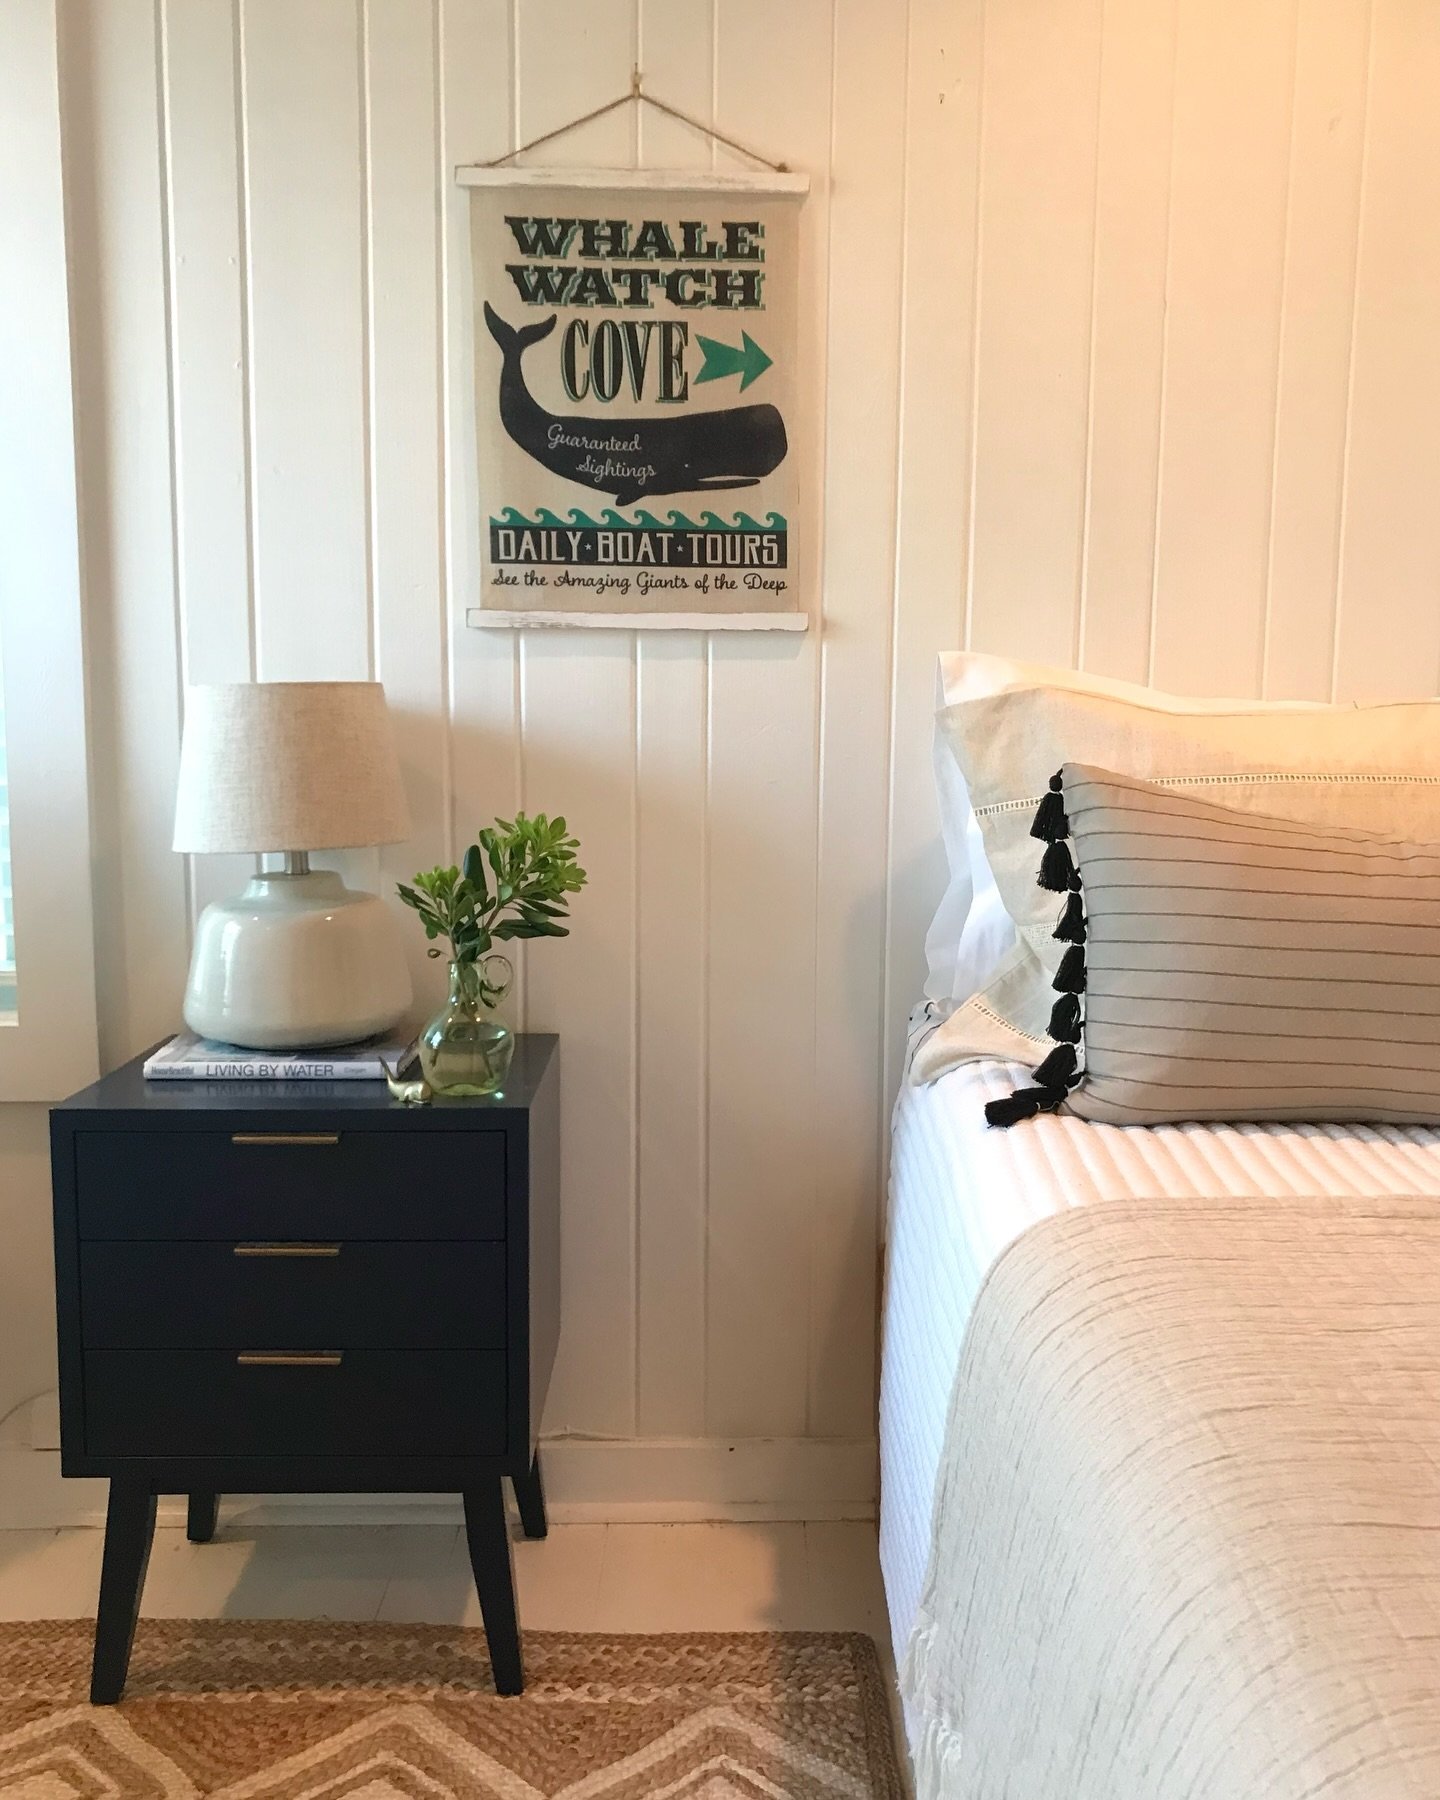 This way to the beach ➡️ This sweet beach cottage bedroom called for a soothing, simple palette with just the right amount of color, pattern and texture. The vintage table lamp was the perfect final touch. An inviting respite after a long day of soak